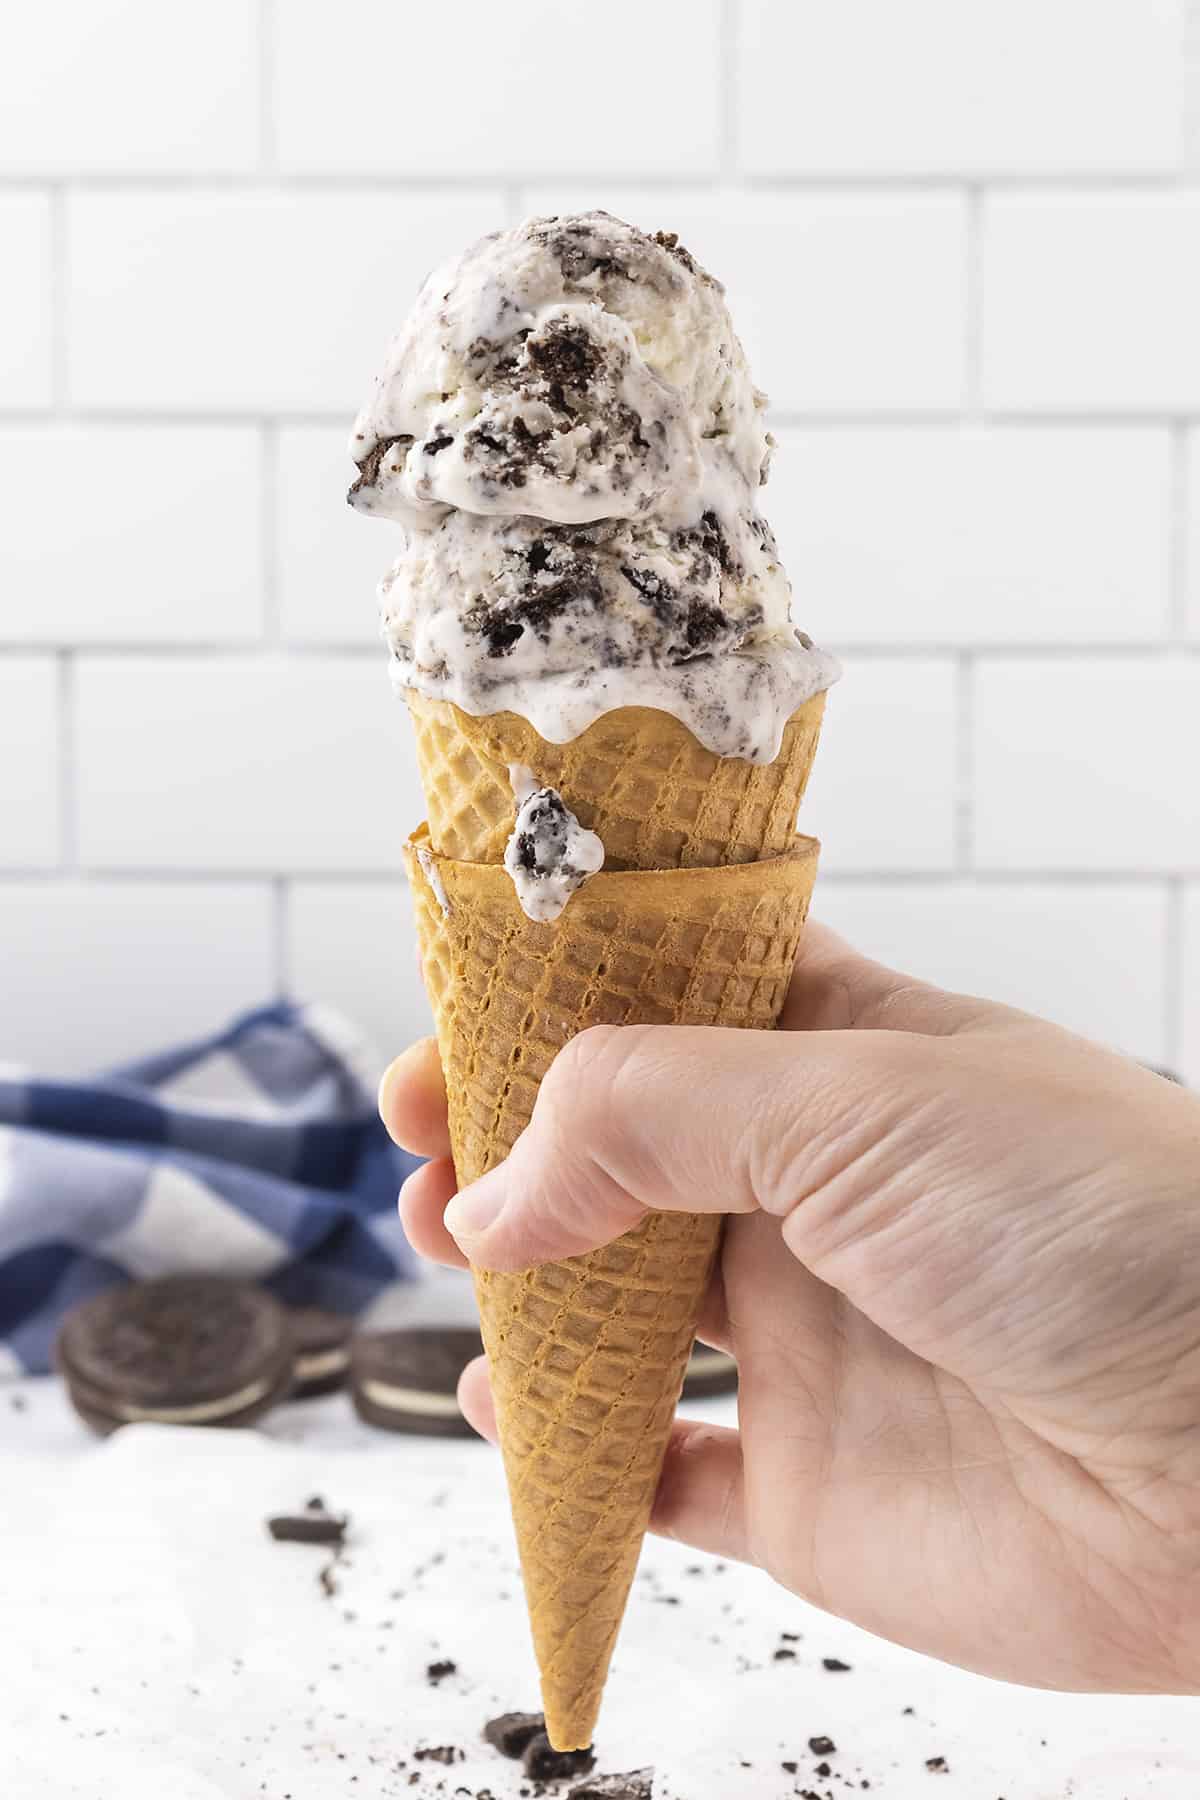 Hand holding a cone full of cookies and cream ice cream.